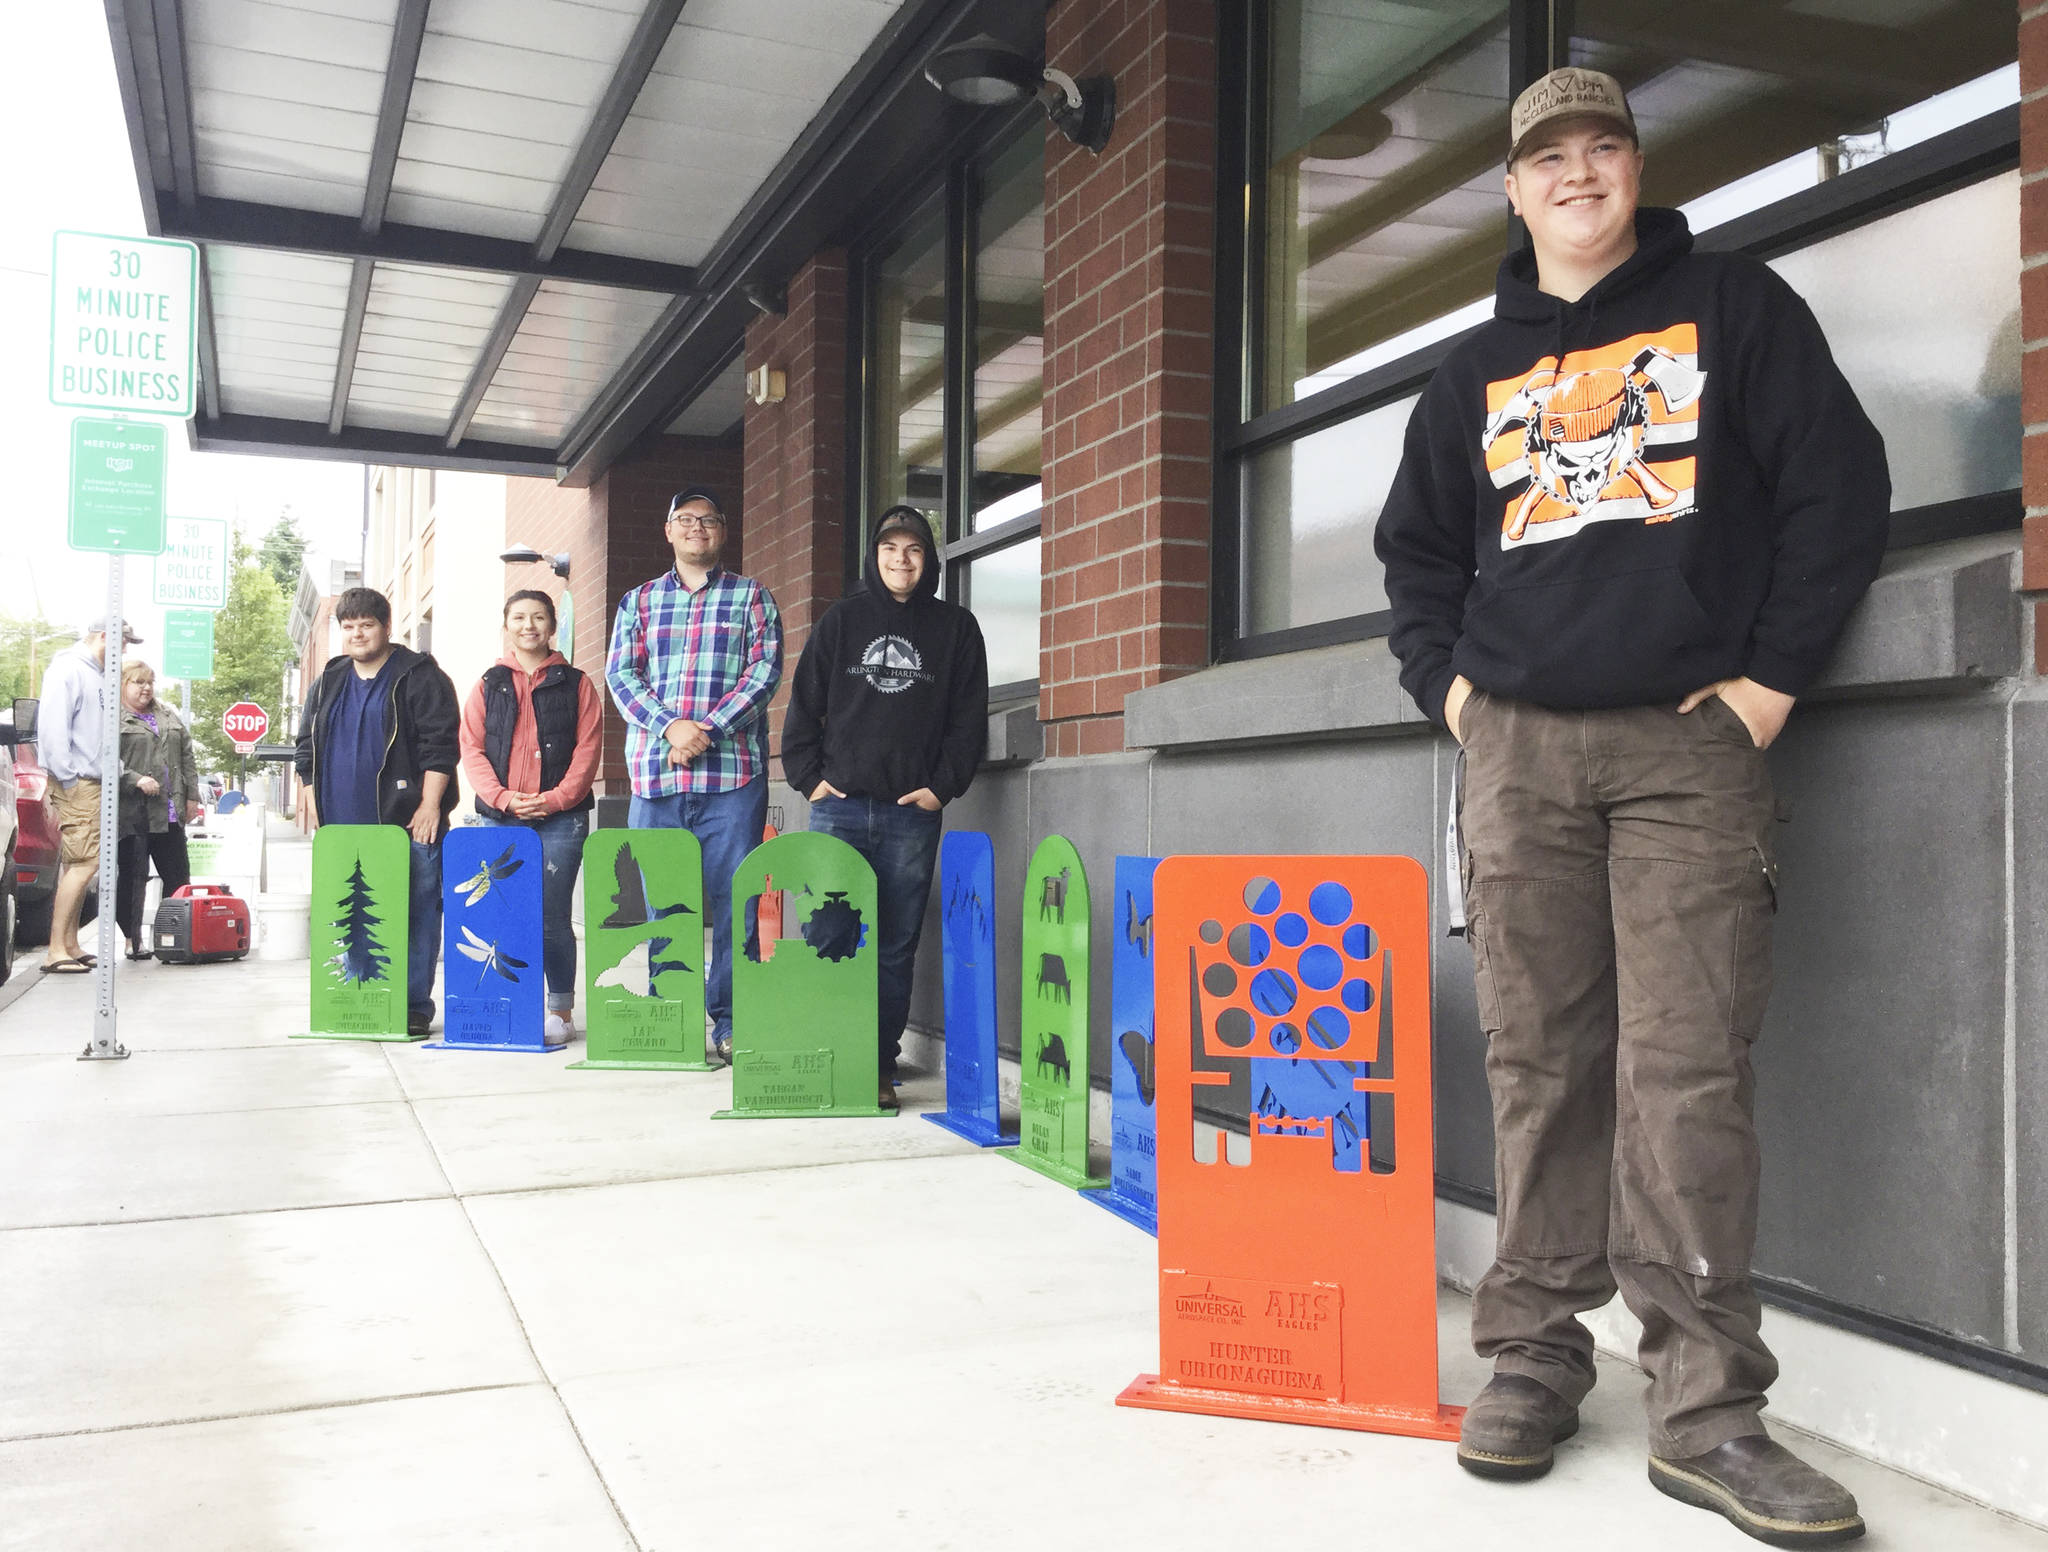 AHS students’ bike racks add colorful legacy for downtown